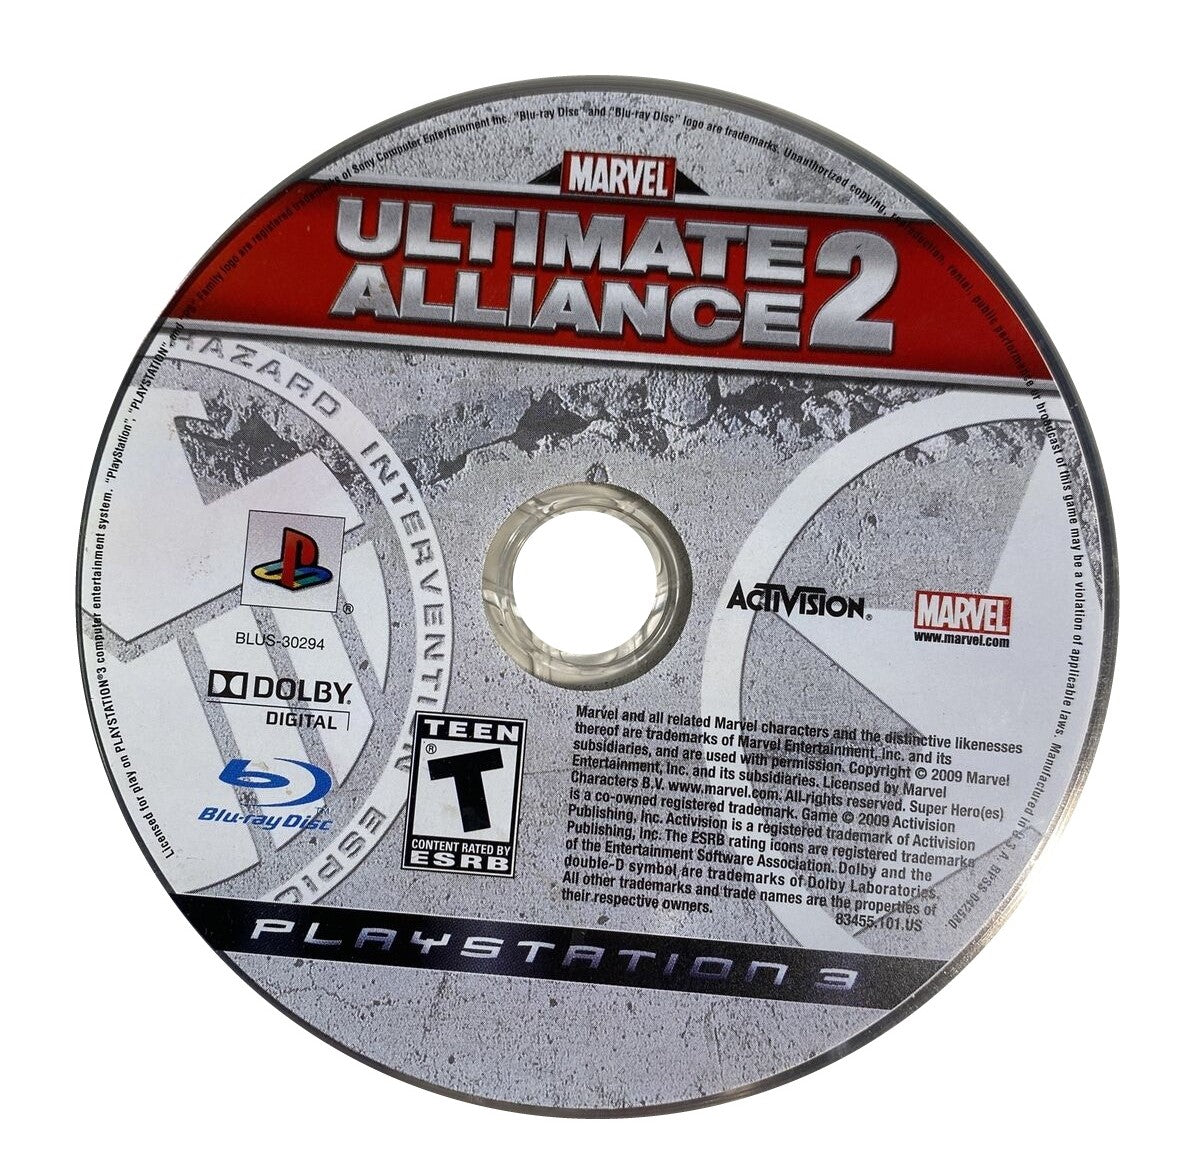 Marvel: Ultimate Alliance 2 - PlayStation 3 (PS3) Game